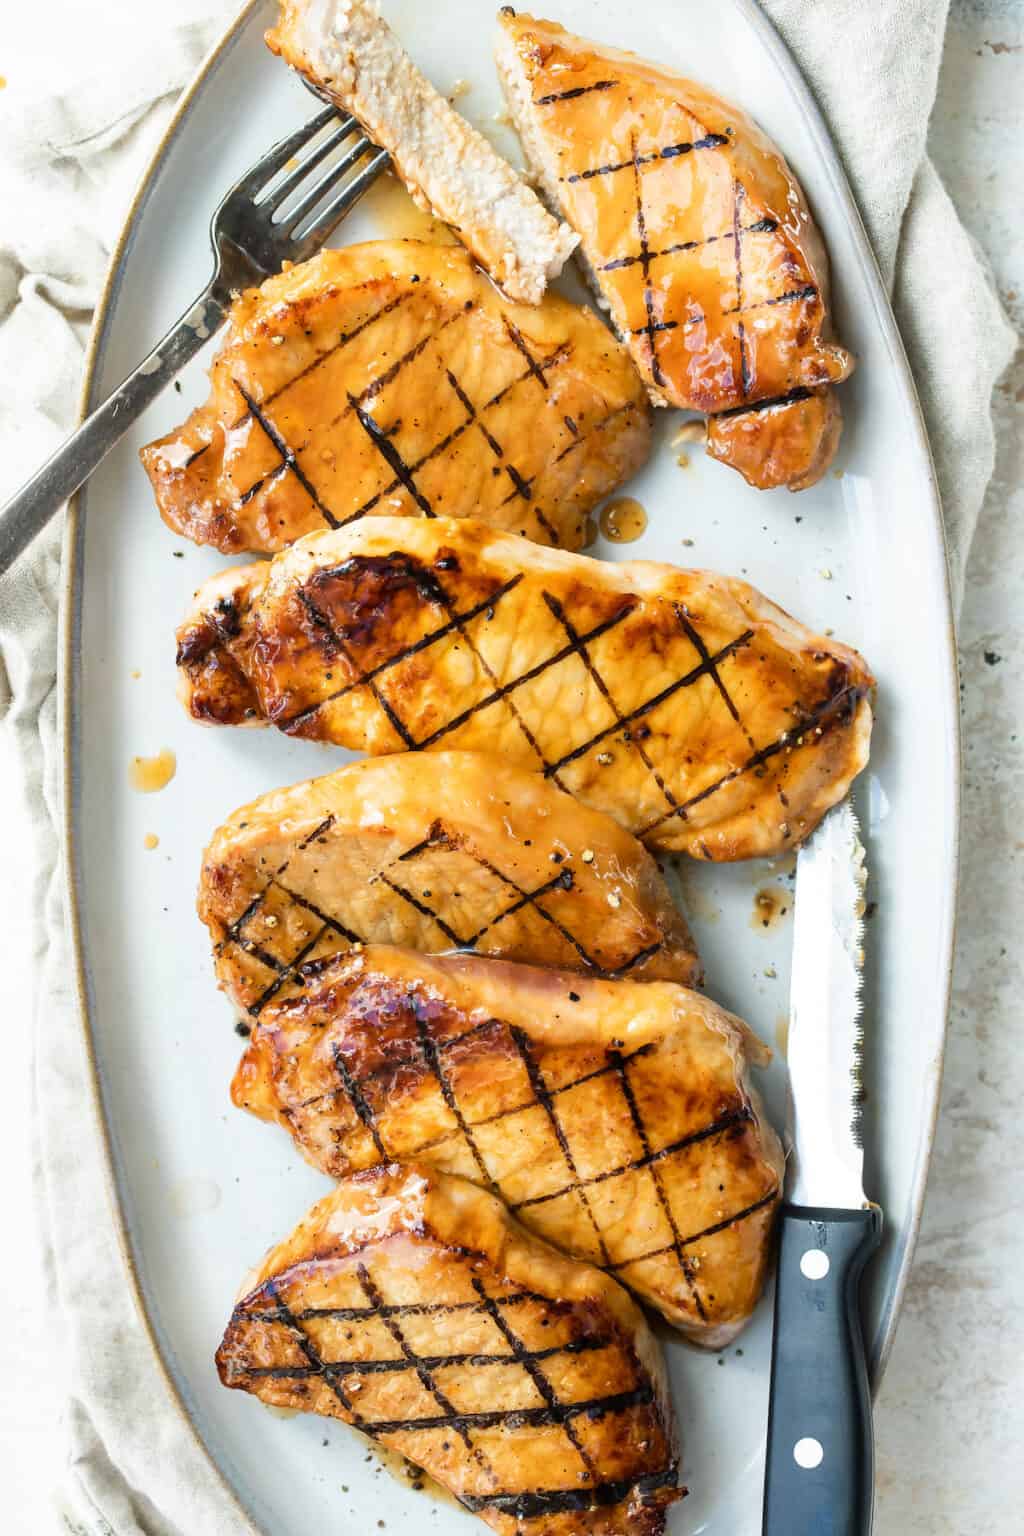 pork chops on the grill